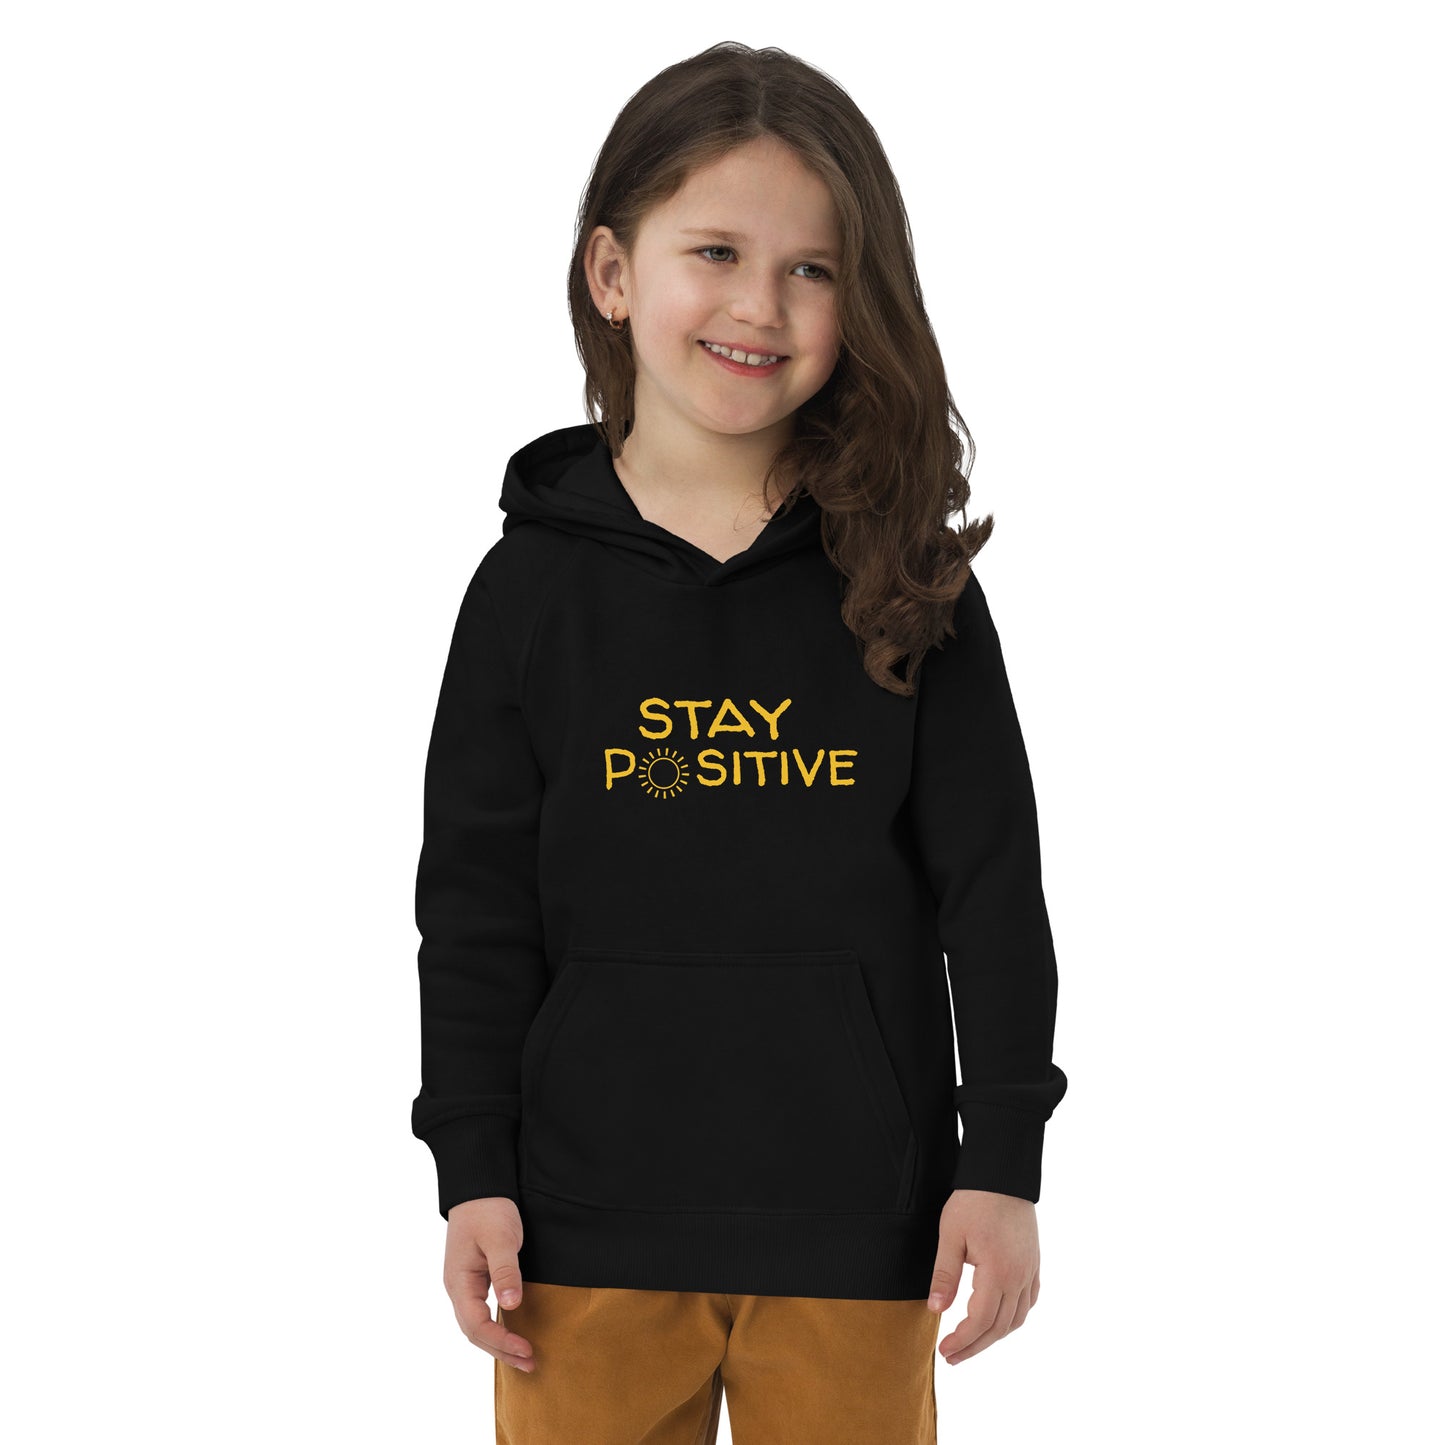 "Positive" children's hoodie (ecological)